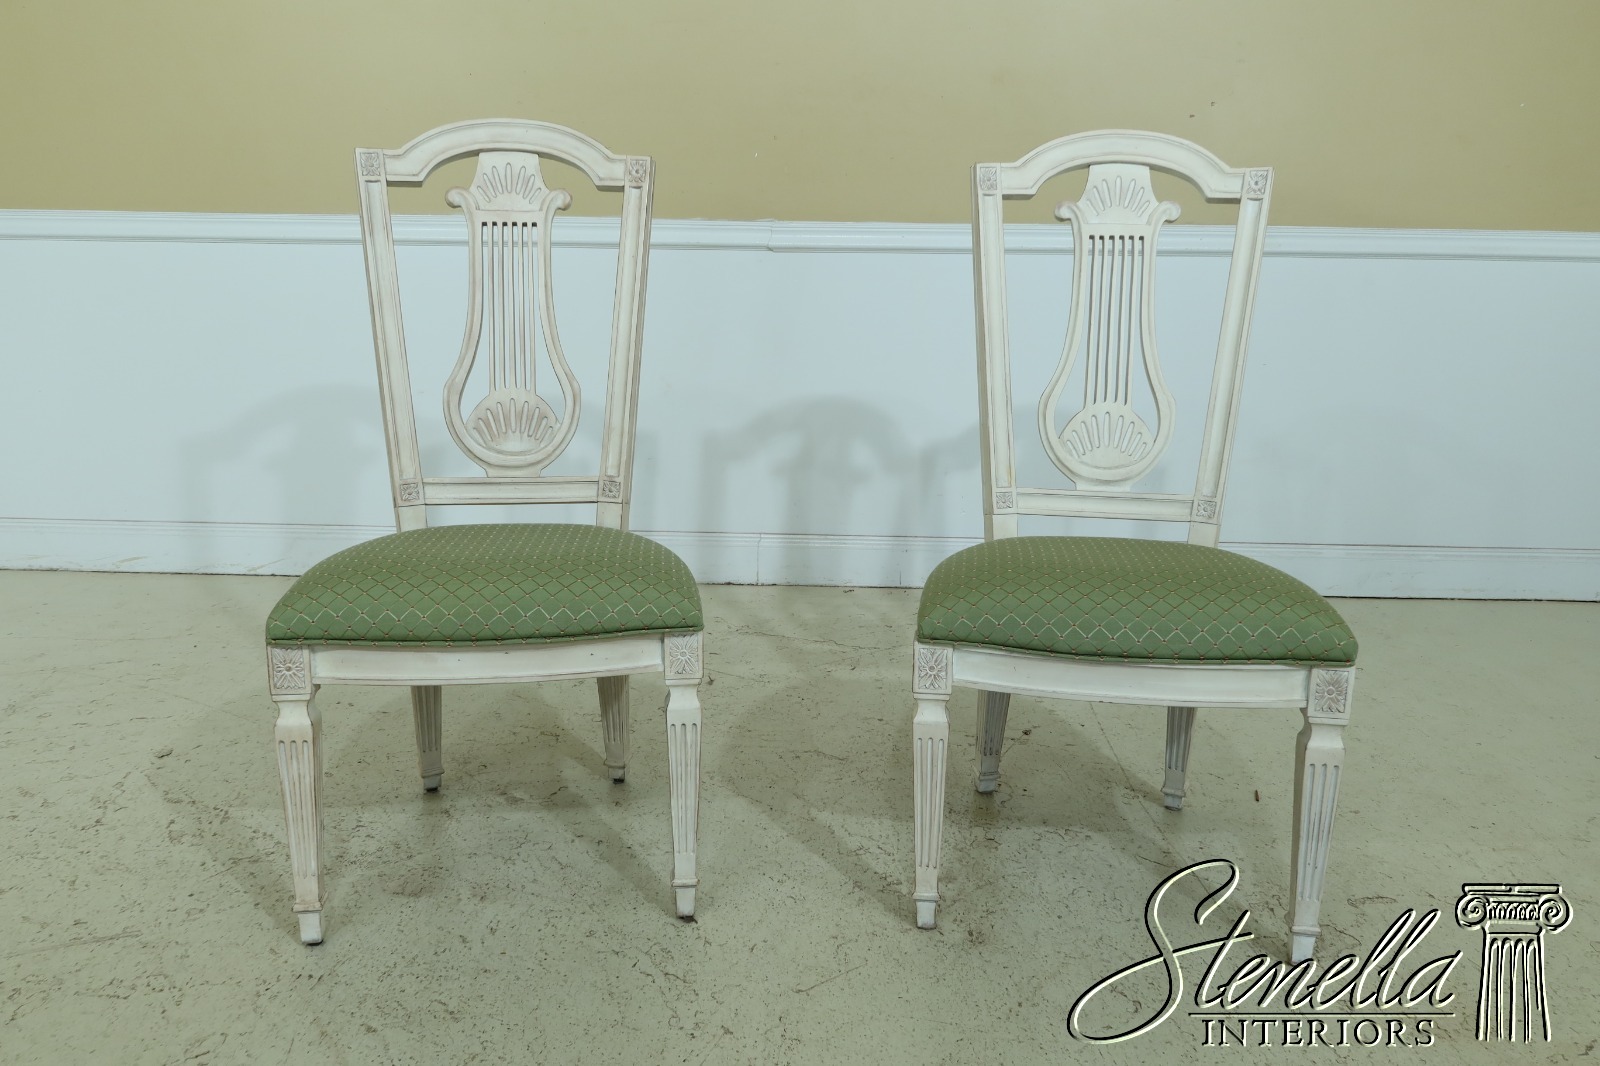 Painted Dining Room Chairs For Sale